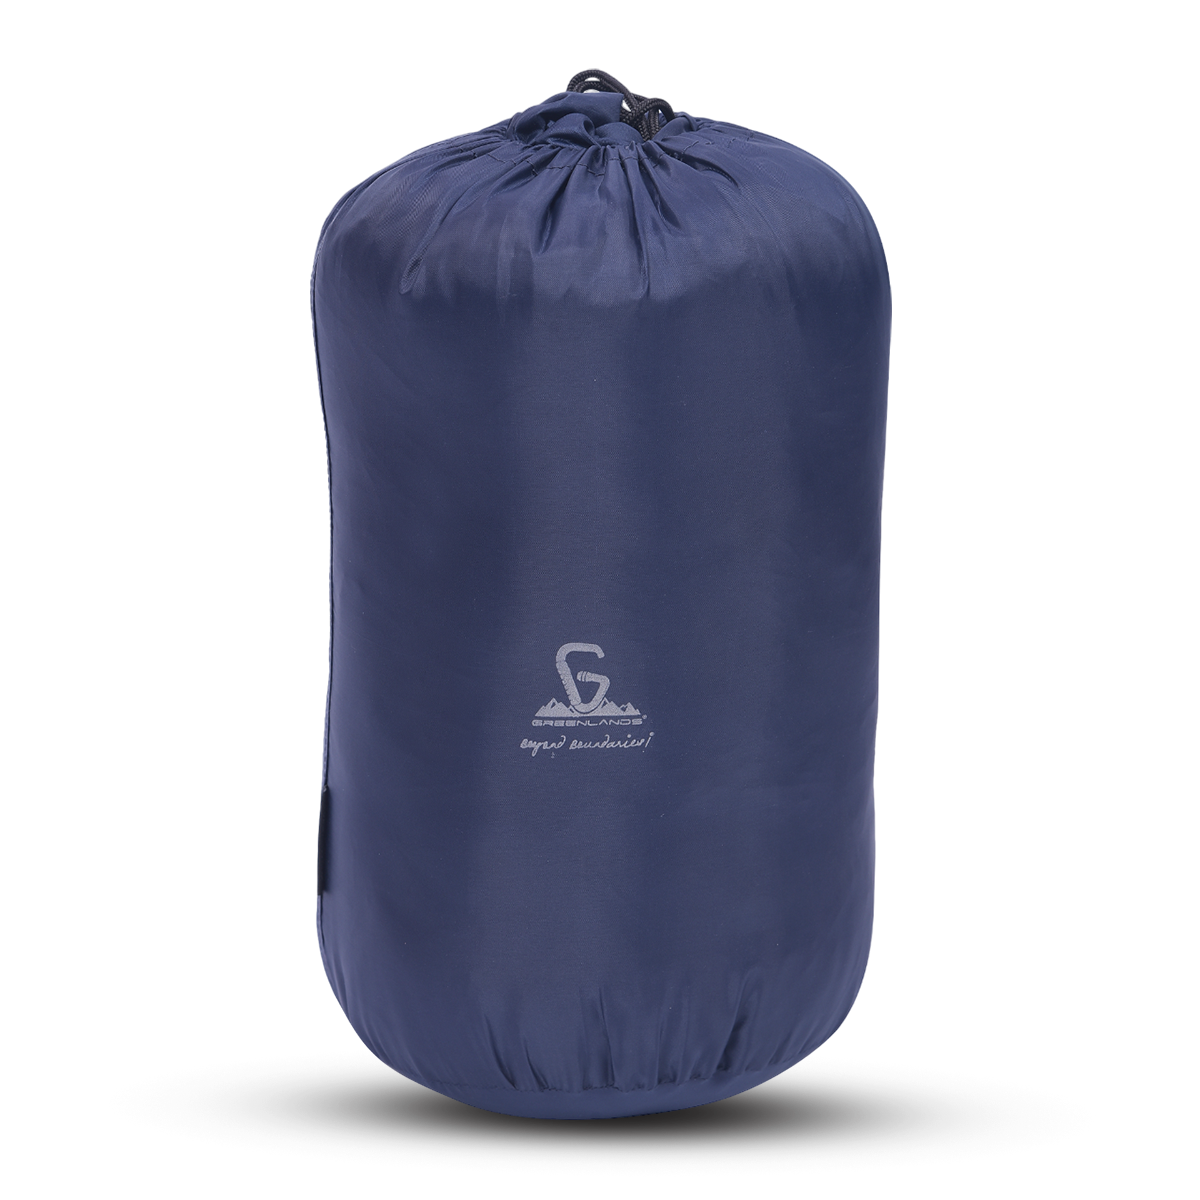 SHIELD Lightweight and Portable Sleeping Bags for Unmatched Comfort in the Great Outdoors - Adult